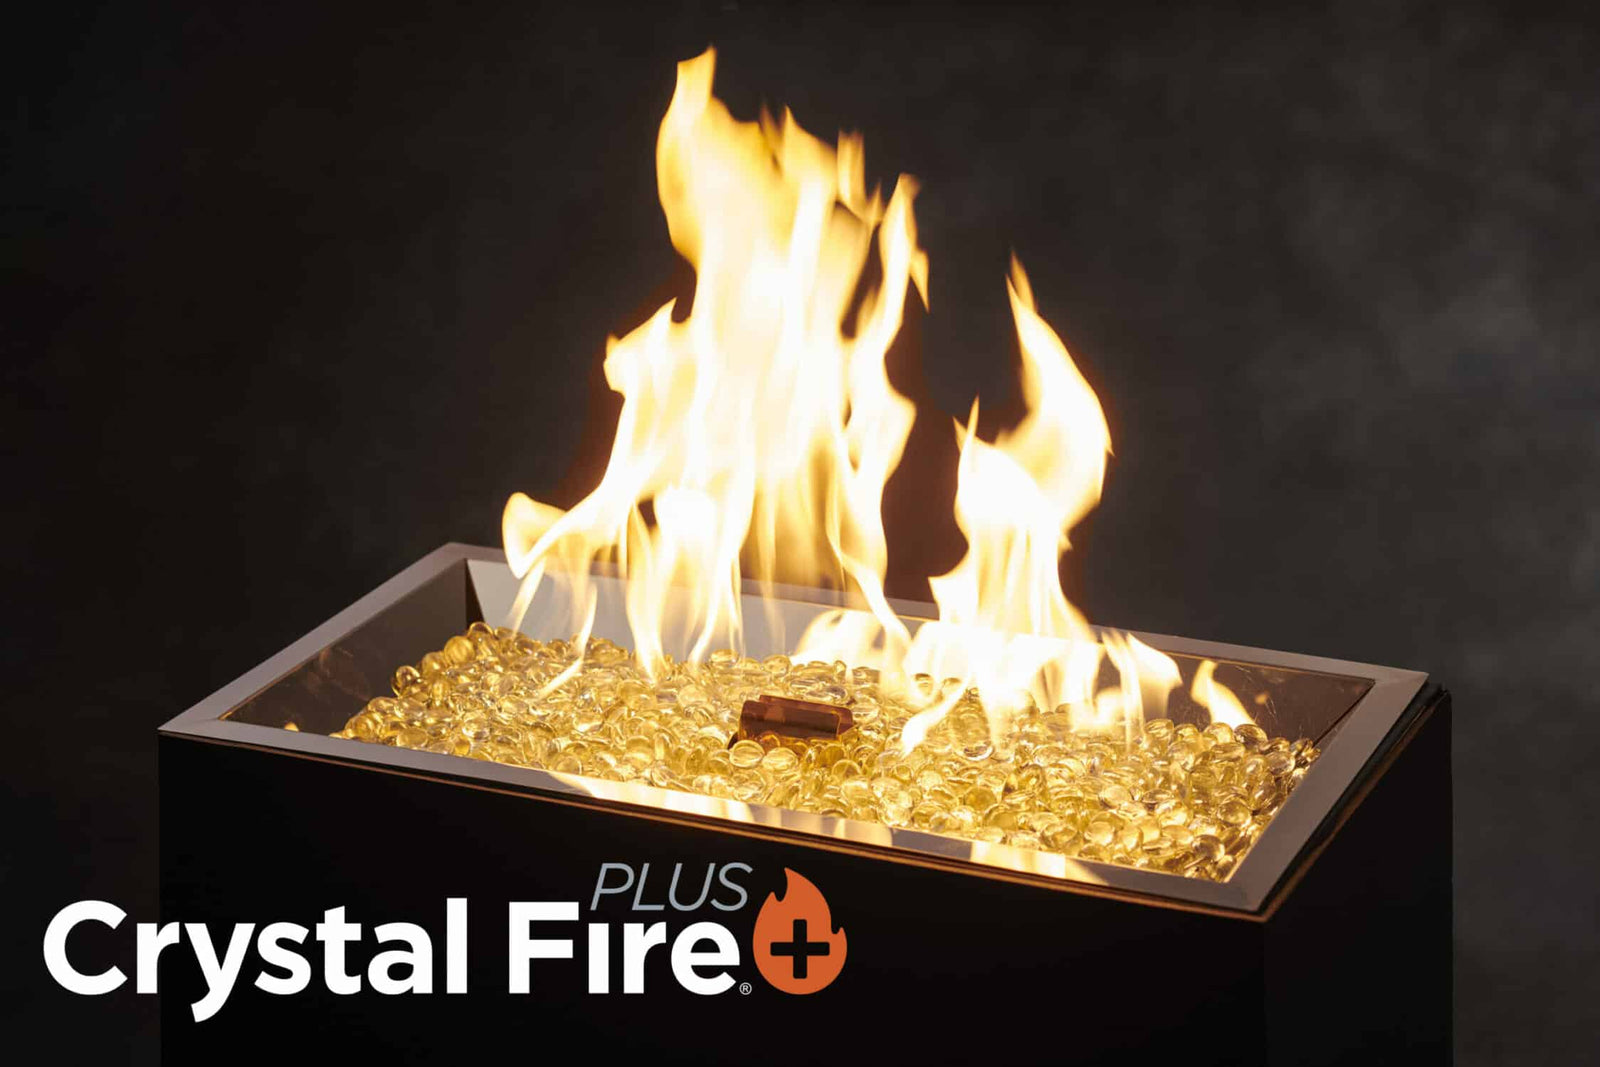 New Crystal Fire¬Æ Plus Technology Provides Safety and Convenience Upgrades